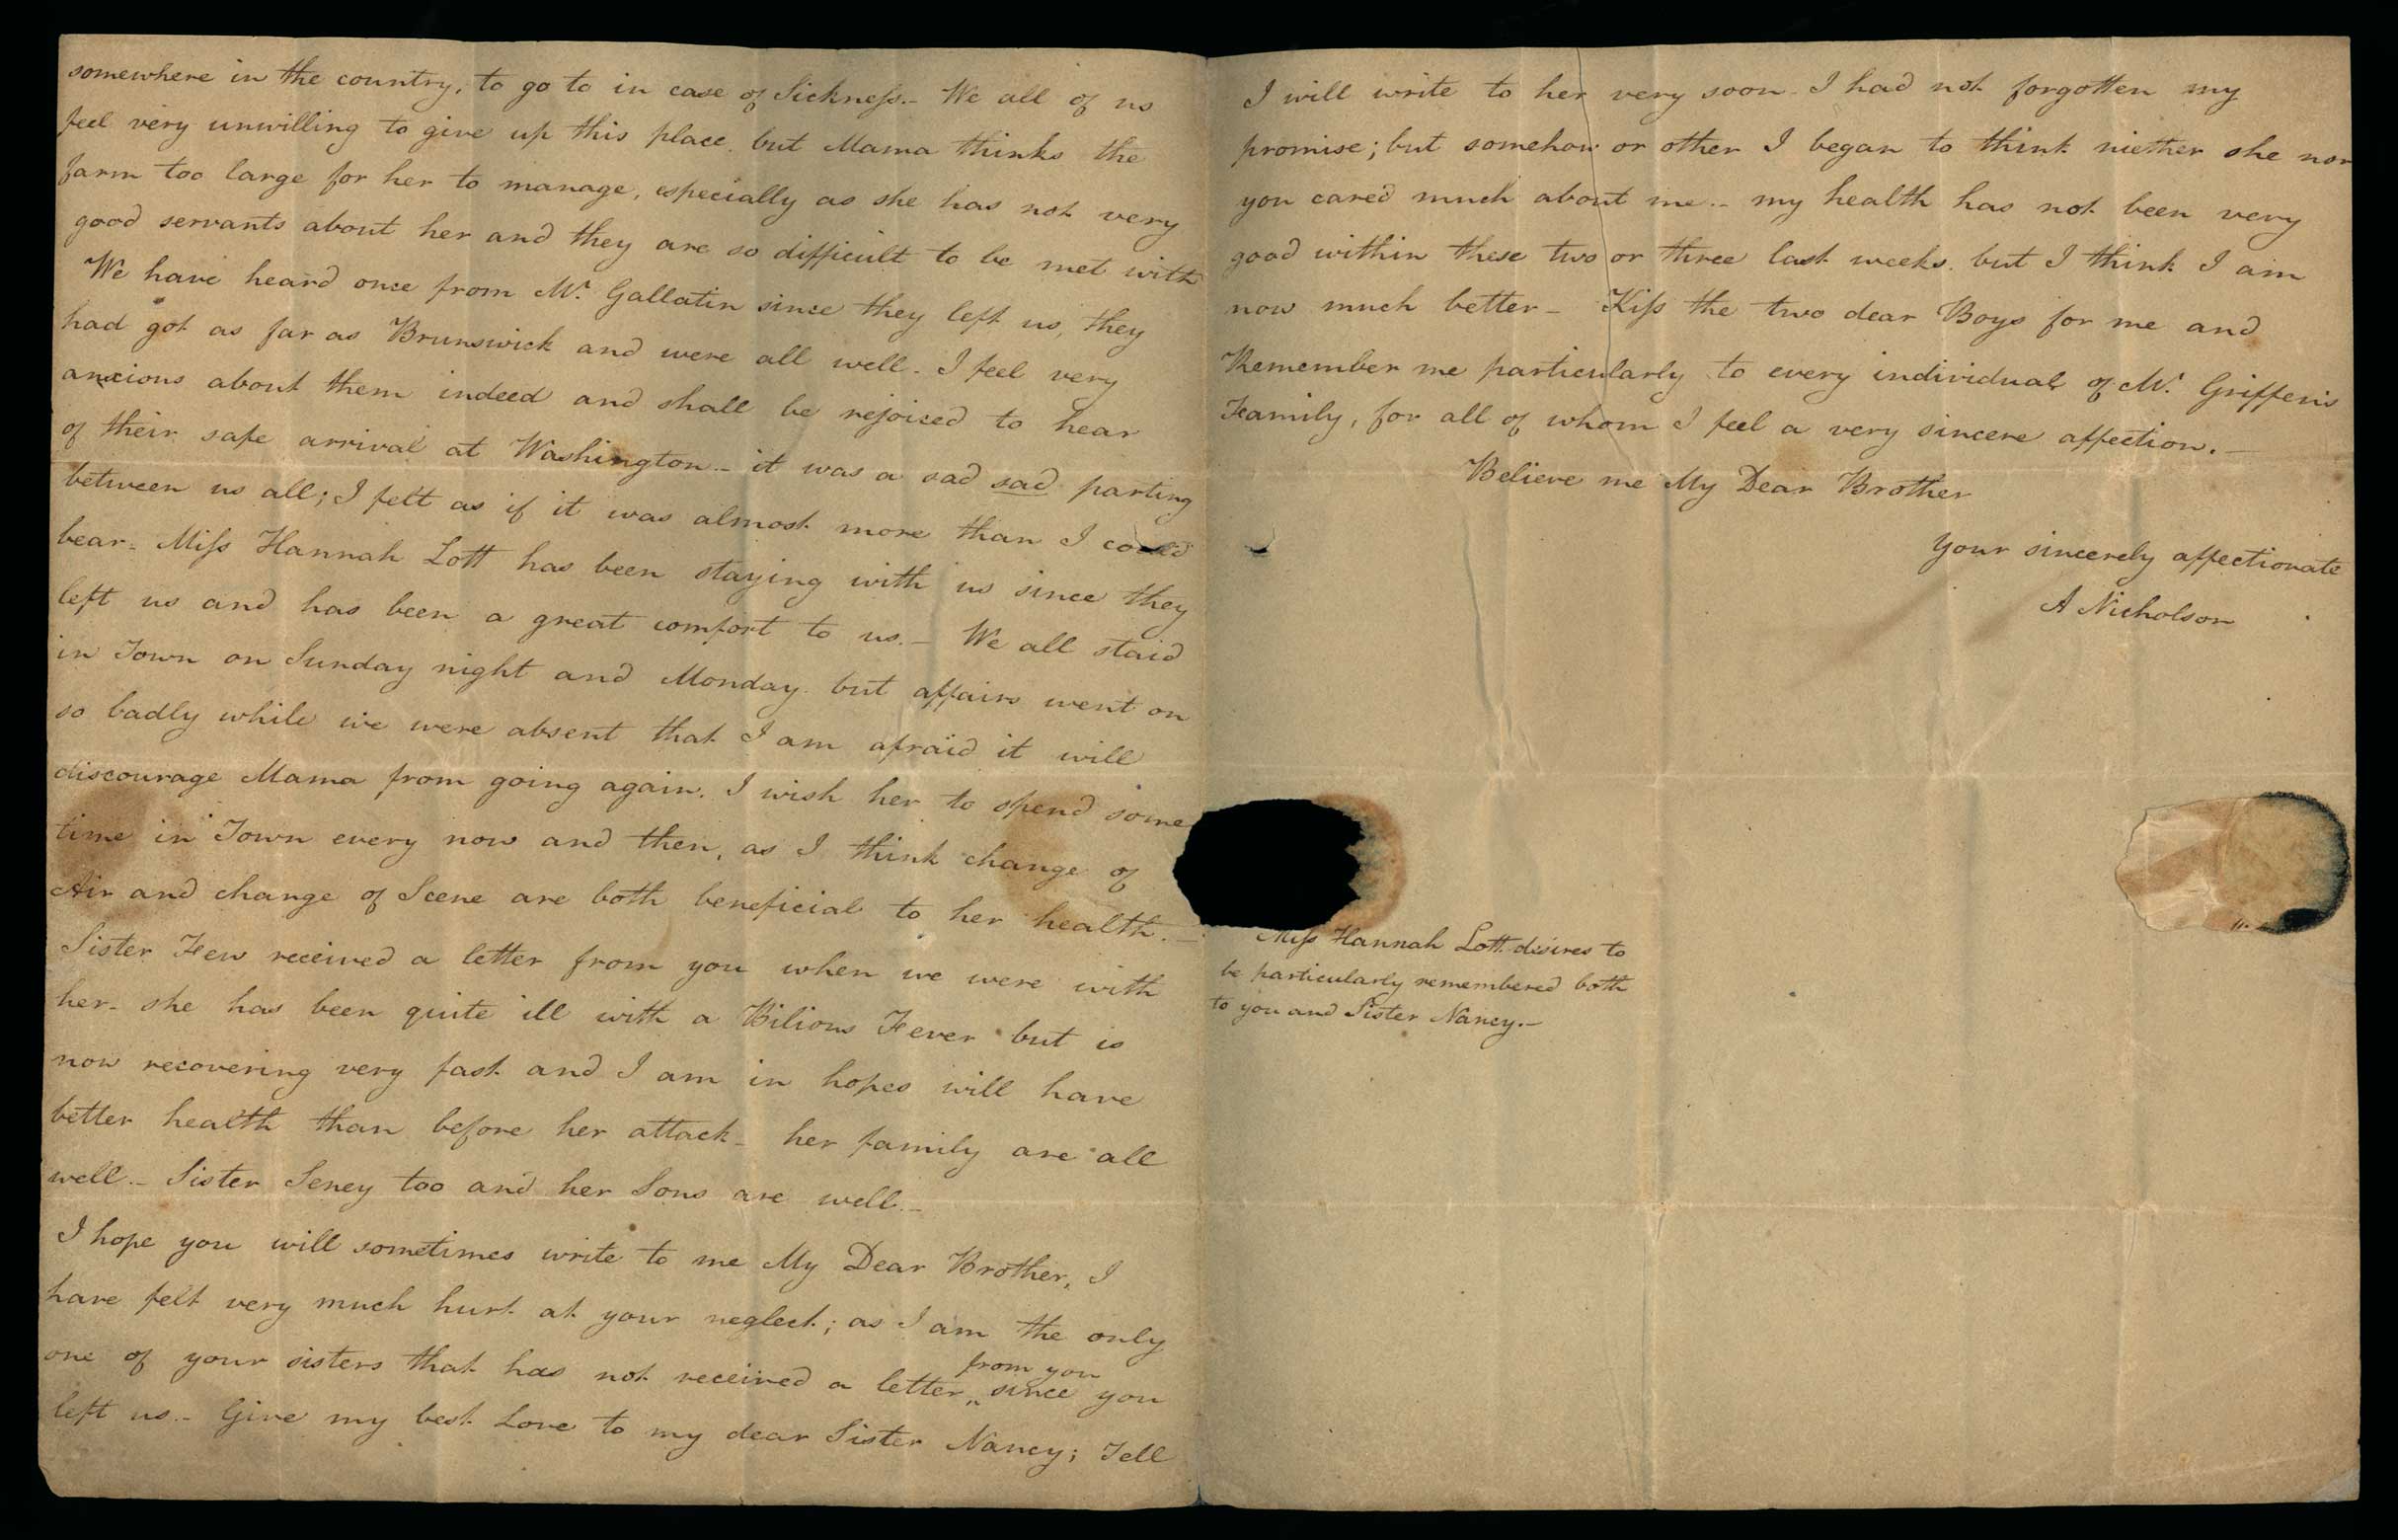 Letter. A[dden] Nicholson, Greenwich, New York, to Mr. James W. Nicholson, New Geneva, Pennsylvania, Pages 2 and 3